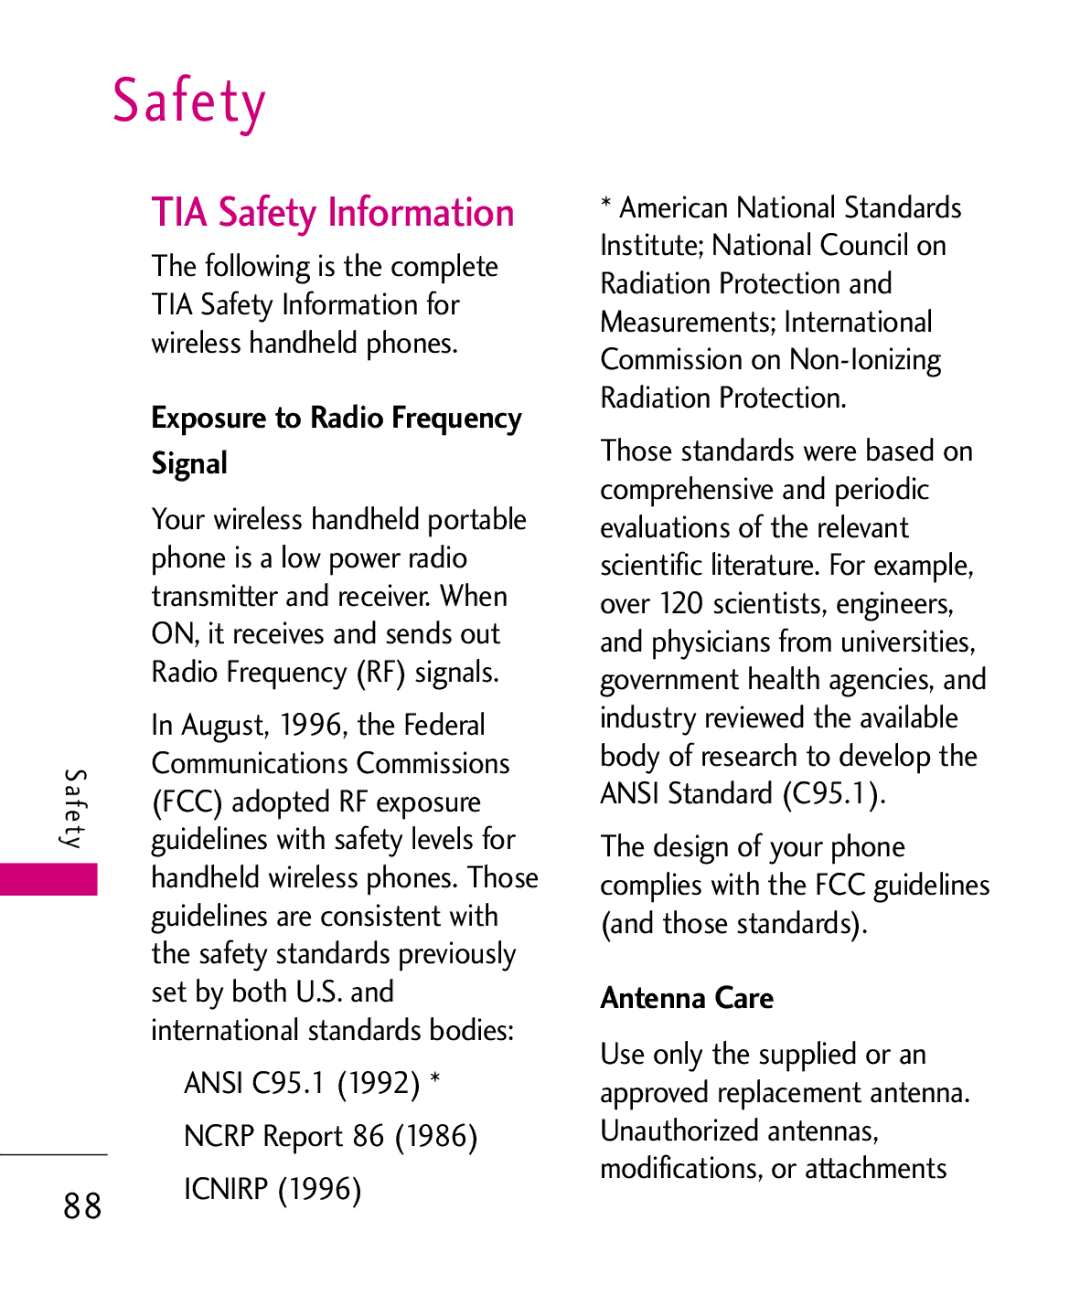 LG Electronics Glimmer manual TIA Safety Information, Exposure to Radio Frequency, Antenna Care 